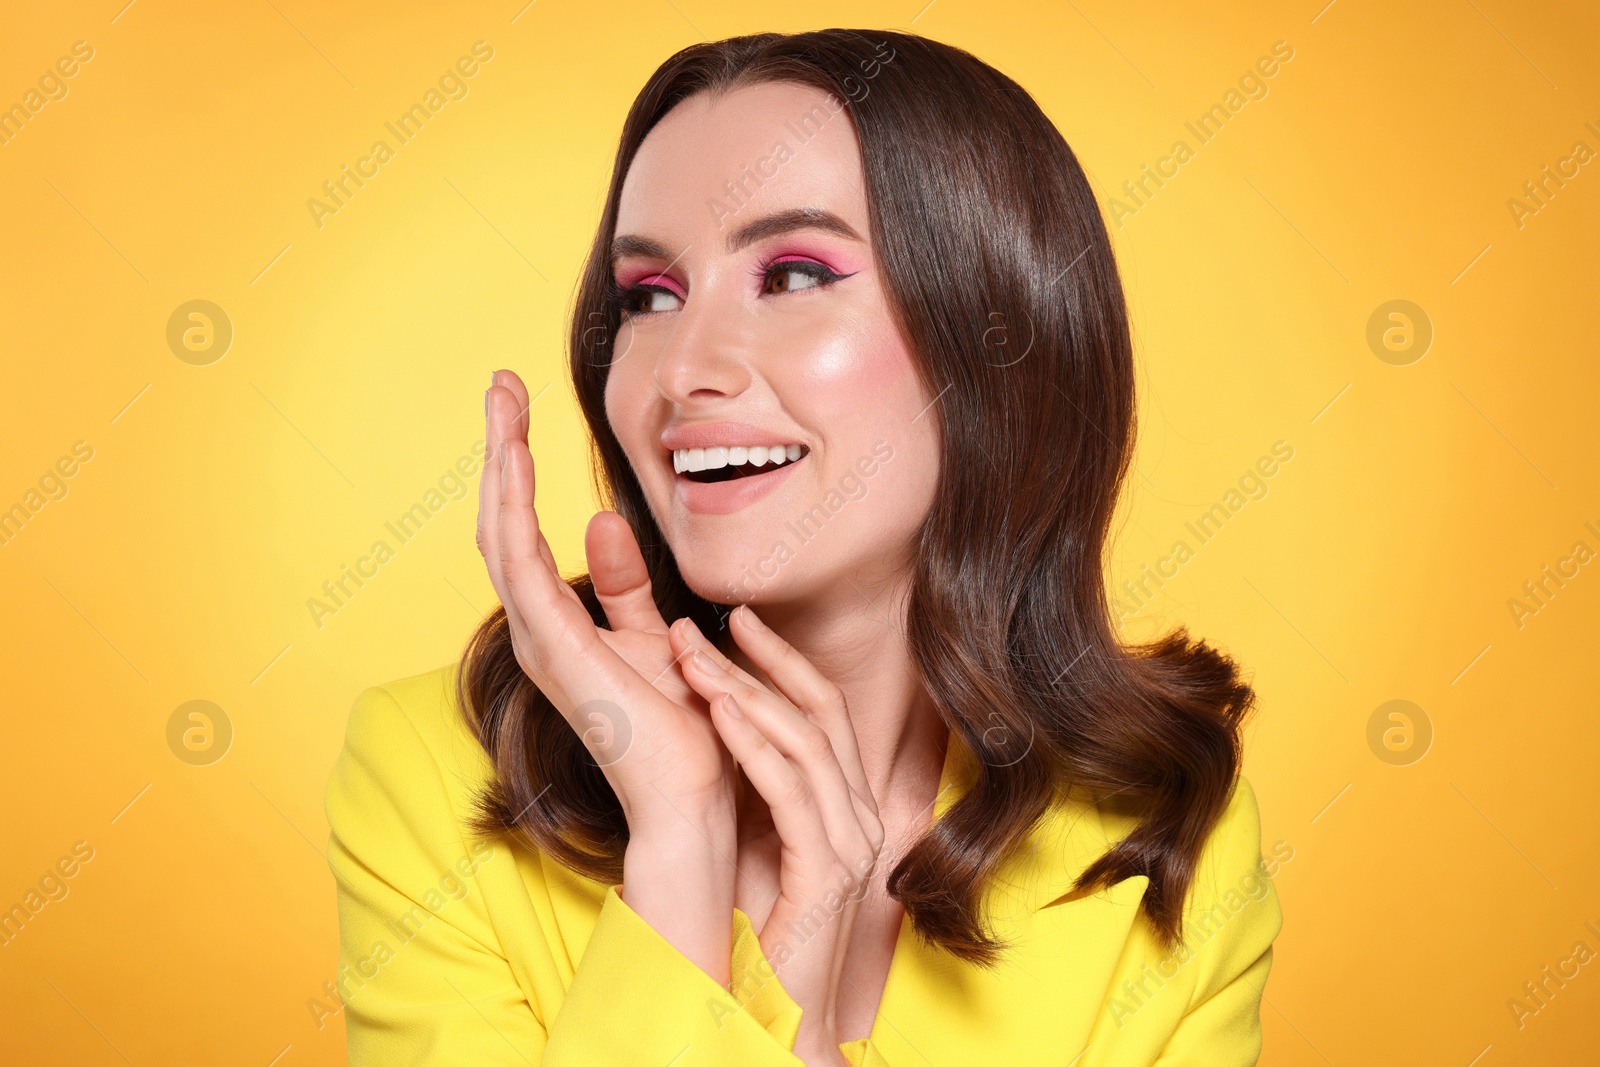 Photo of Portrait of beautiful young woman with makeup and gorgeous hair styling on yellow background